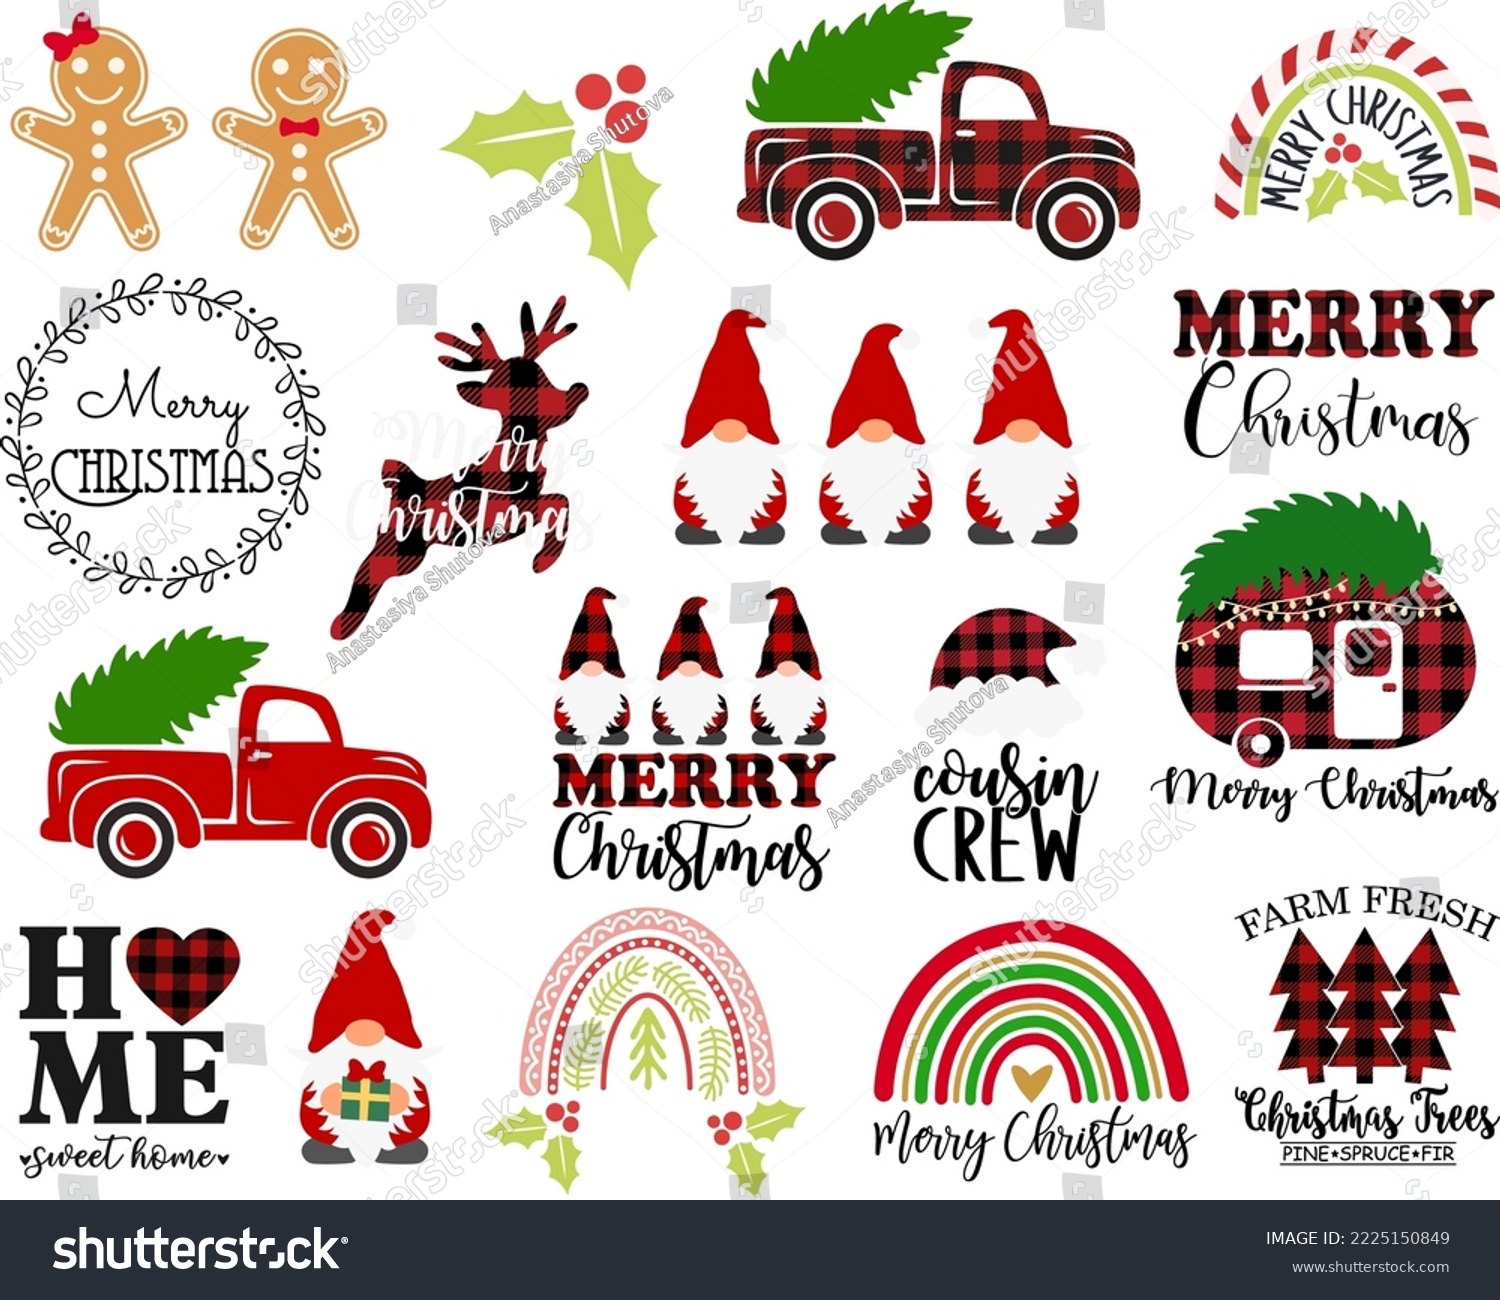 SVG of Christmas Svg bundle - old vintage truck, Merry Christmas sign, mistletoe, buffalo plaid reindeer, gingerbread, rainbow. Christmas gnomes vector isolated on white background. Christmas clipart svg